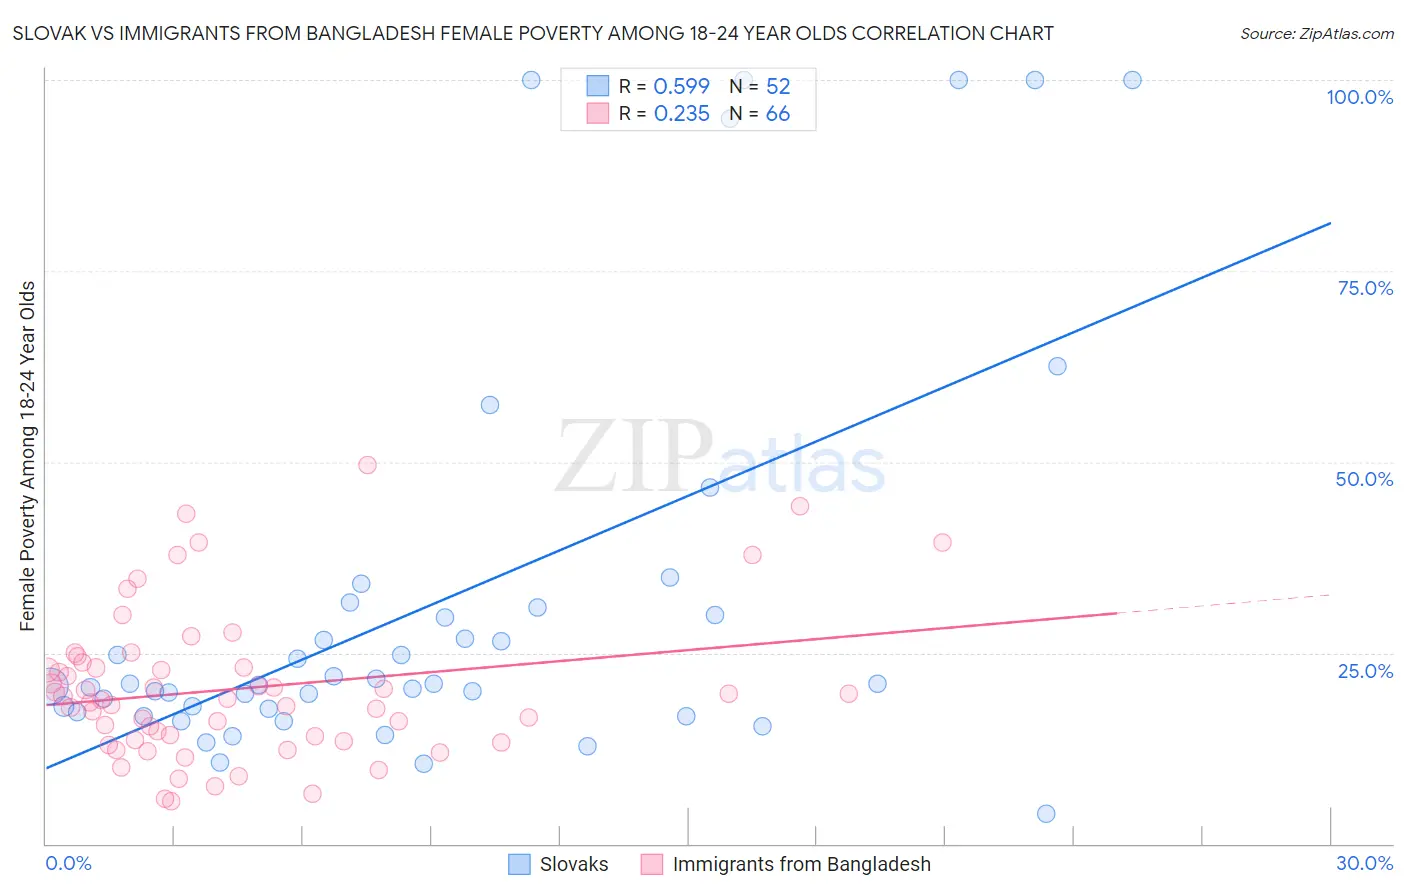 Slovak vs Immigrants from Bangladesh Female Poverty Among 18-24 Year Olds